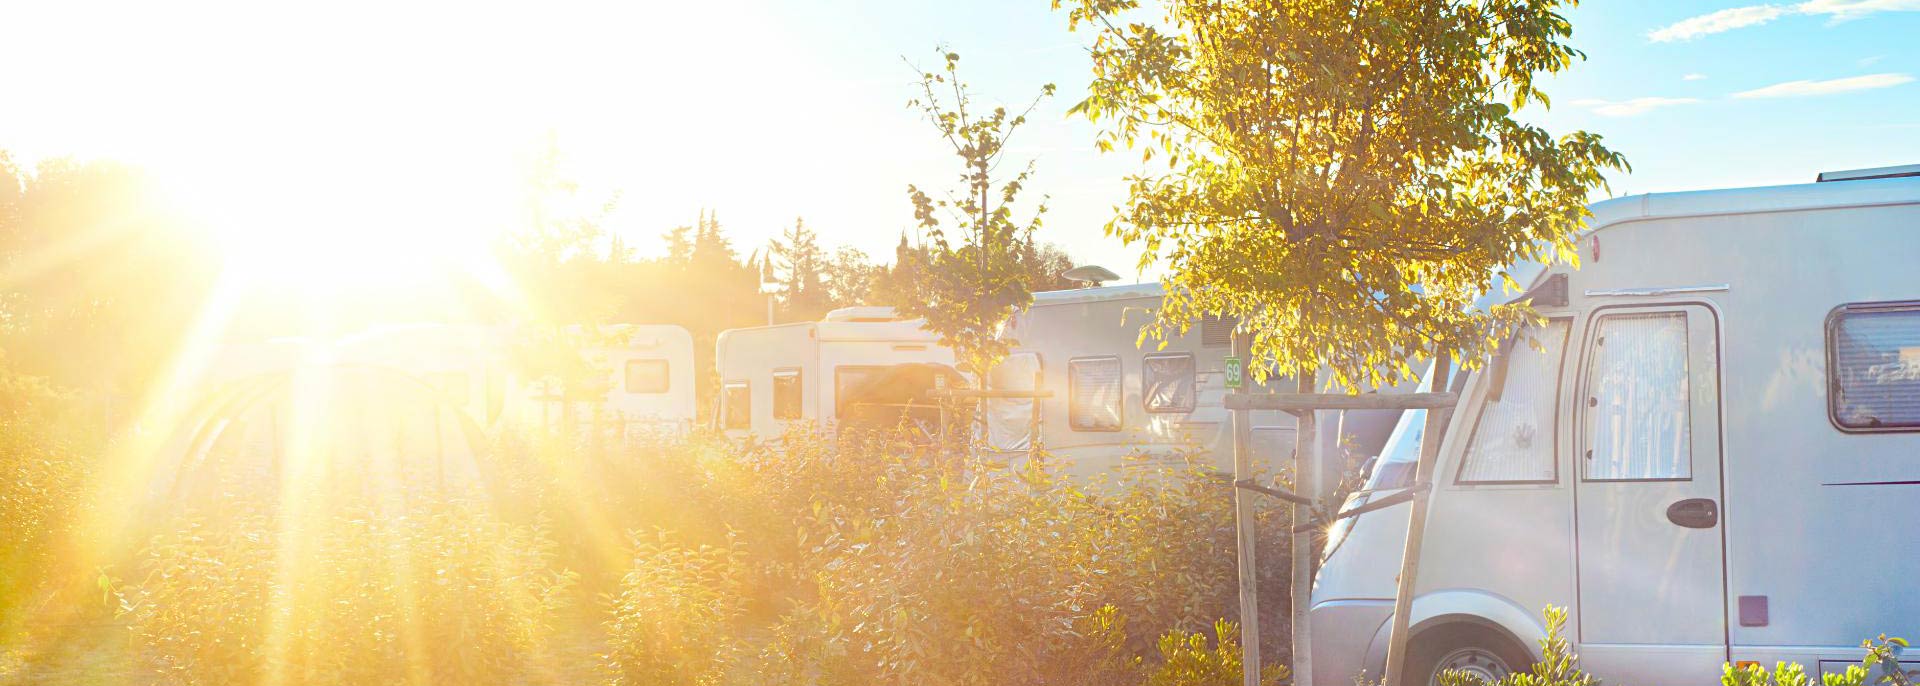 Bright and sunny RV park with motorhomes and trailers parked